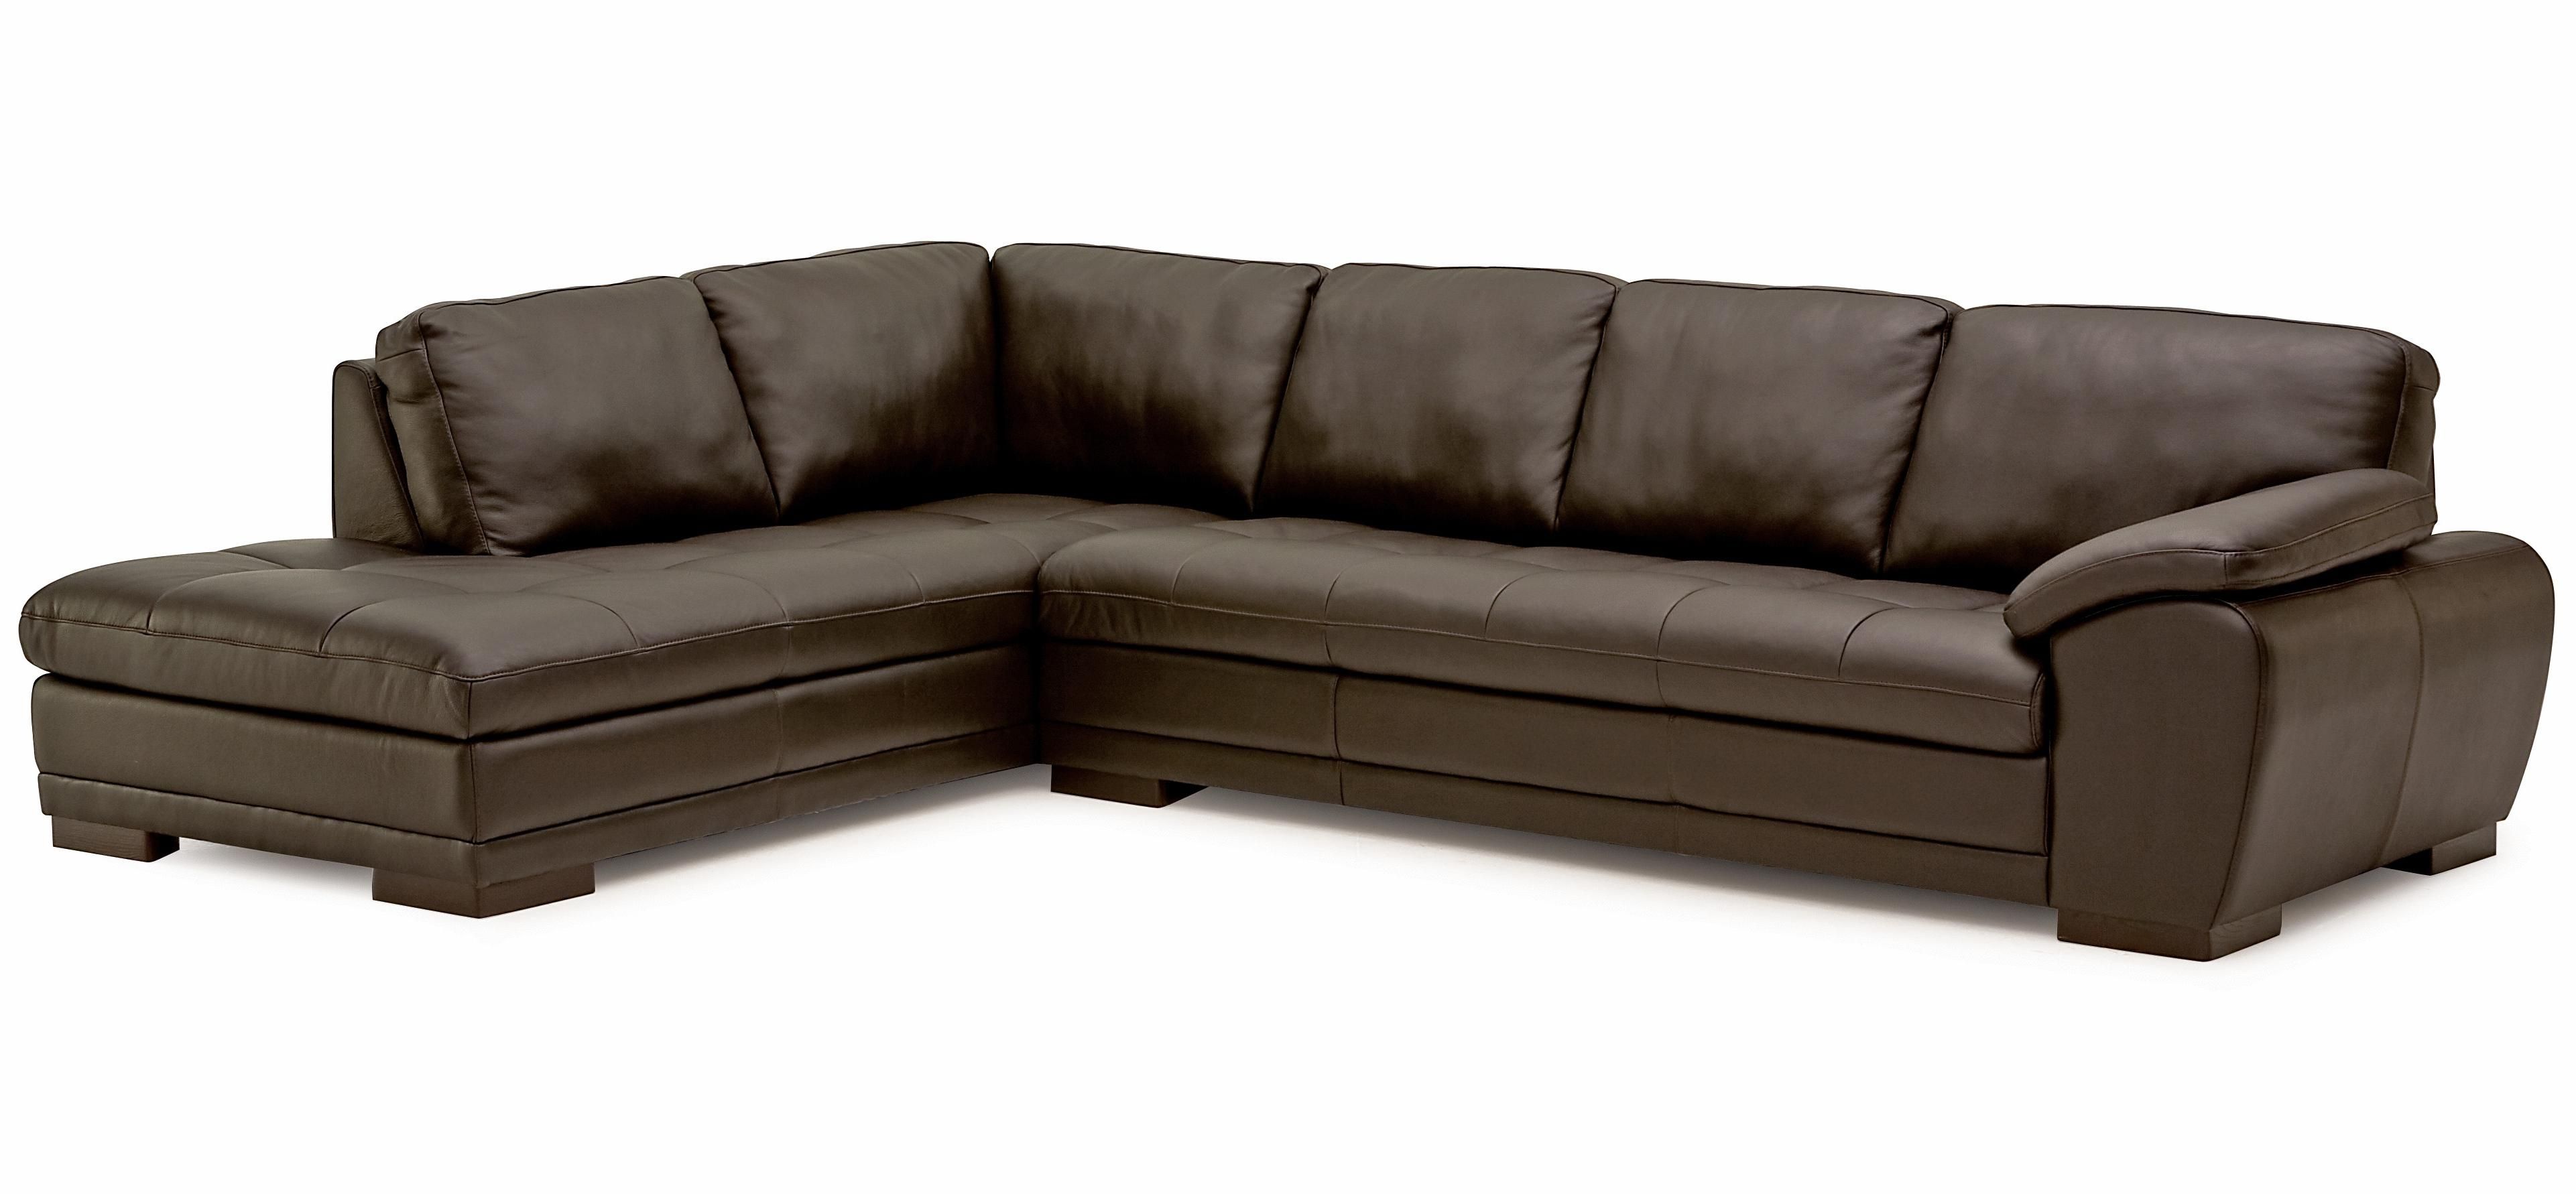 Palliser Miami Contemporary 2 Piece Sectional Sofa With Left Facing Within Miami Sectional Sofas (Photo 4 of 10)